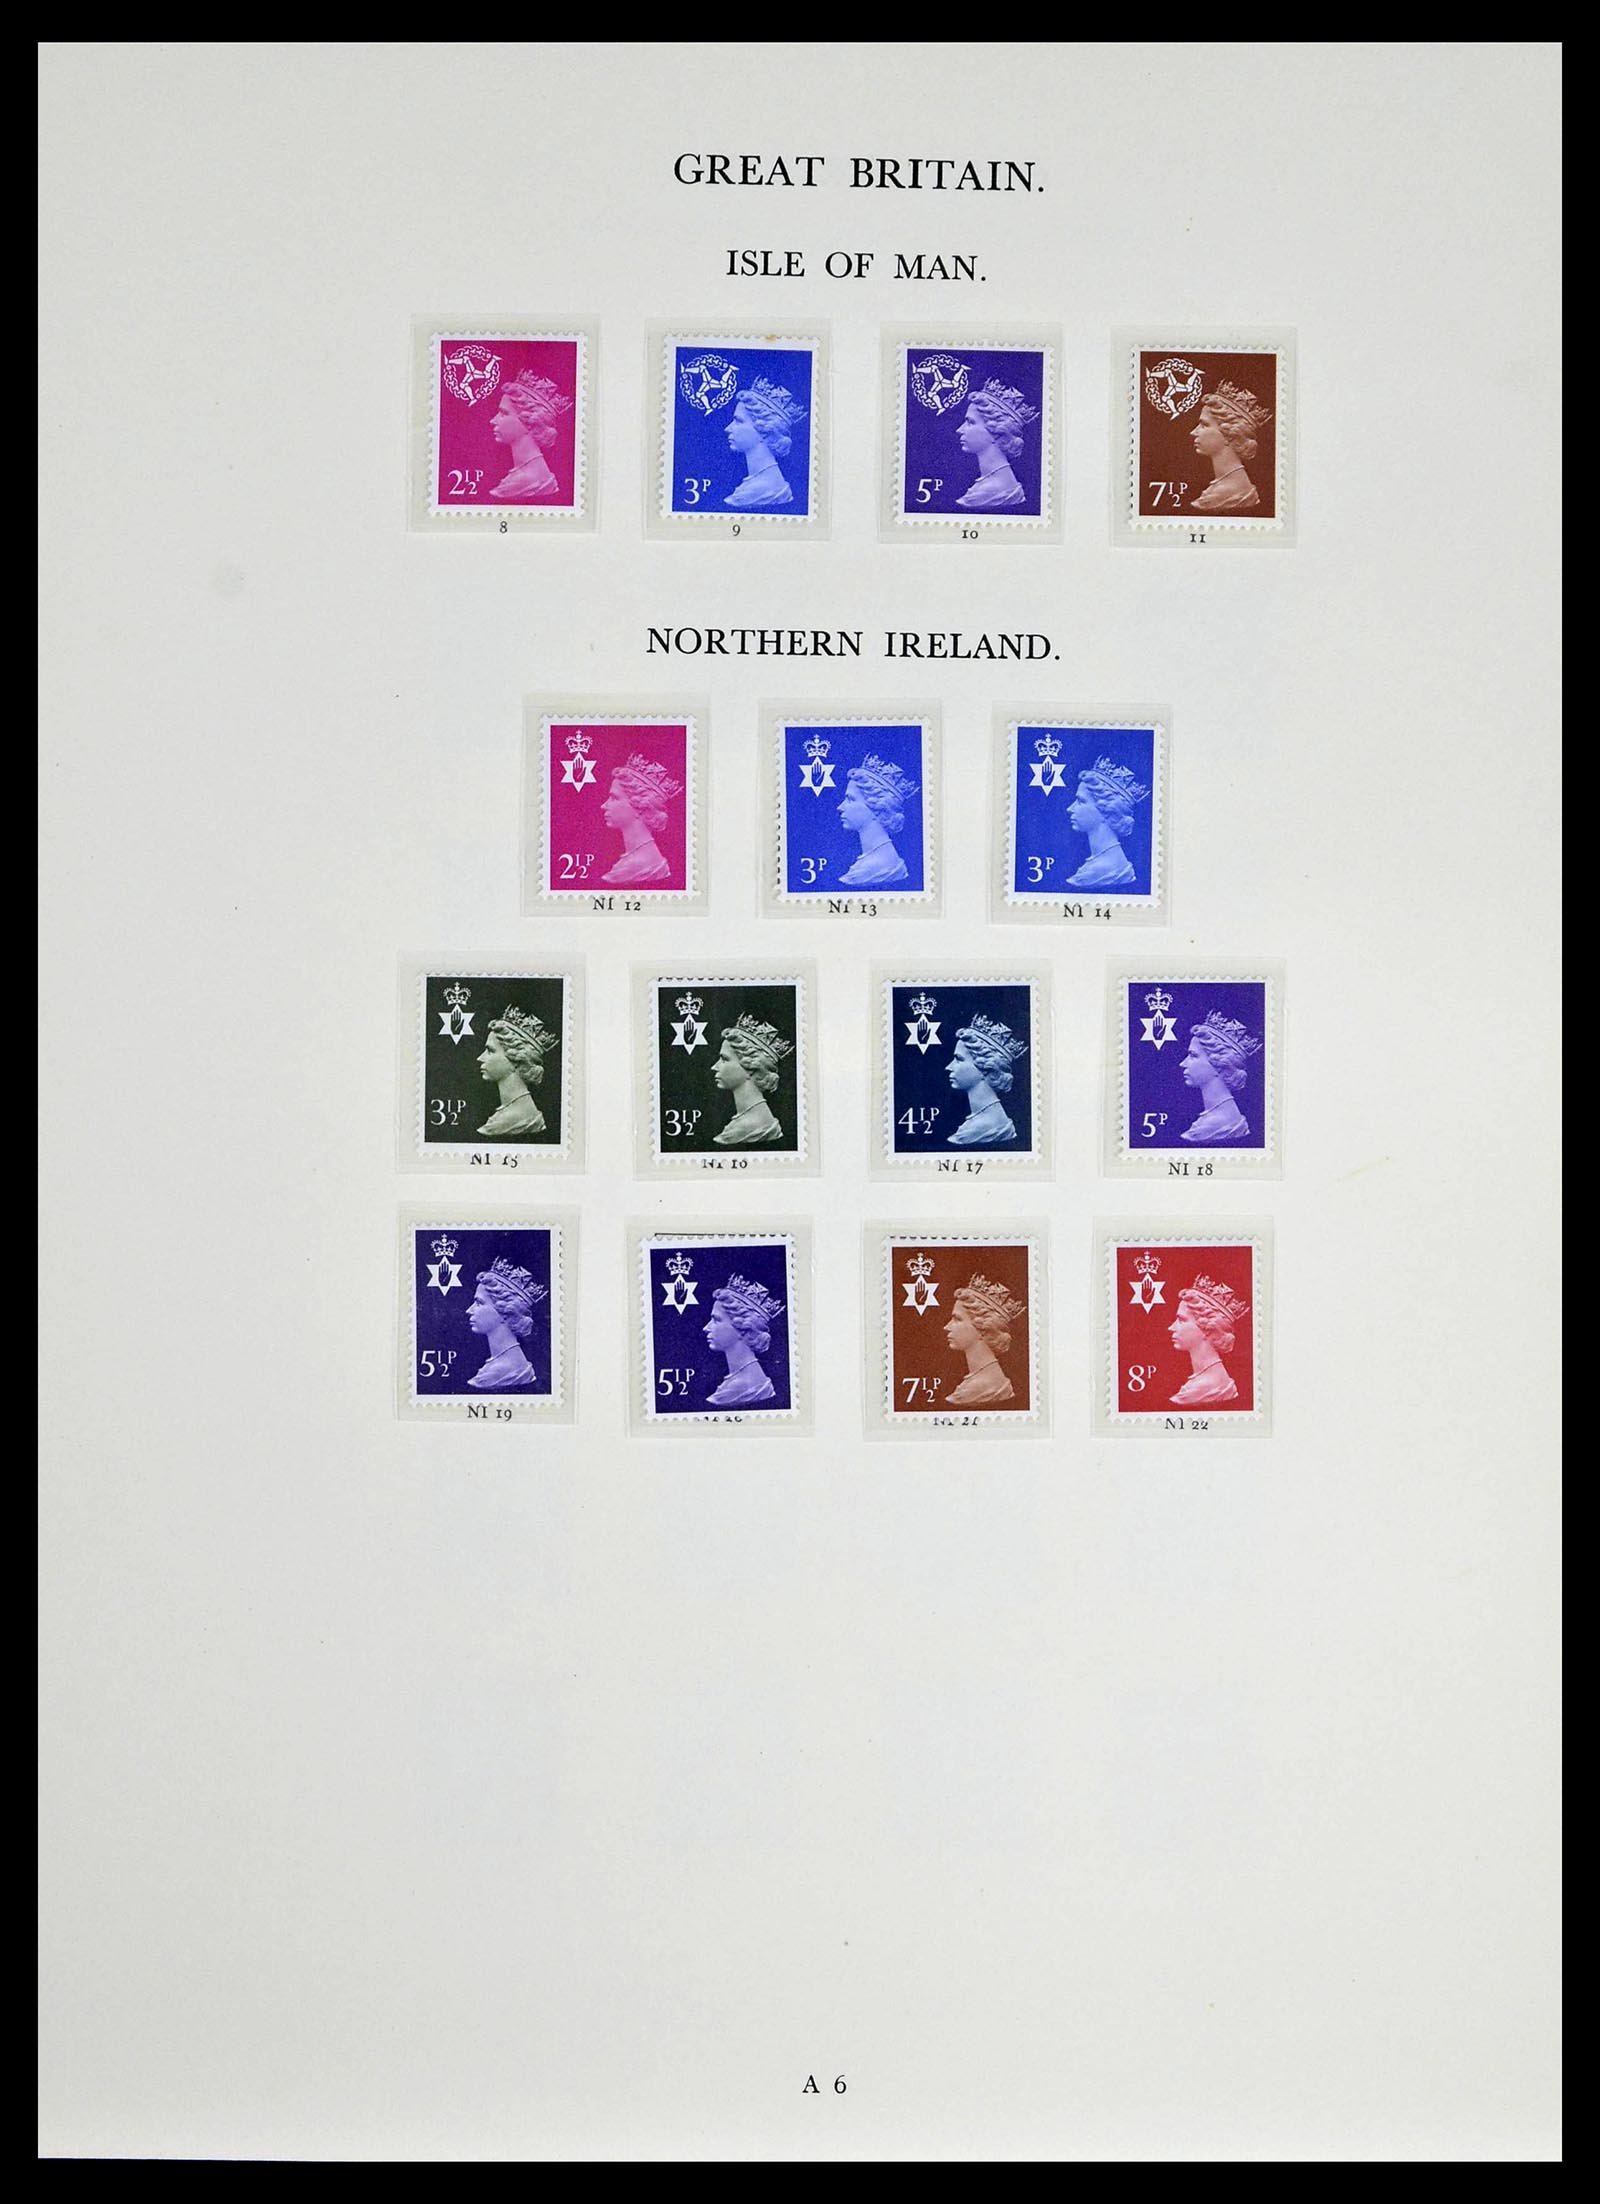 39025 0146 - Stamp collection 39025 Great Britain specialised 1840-1990.